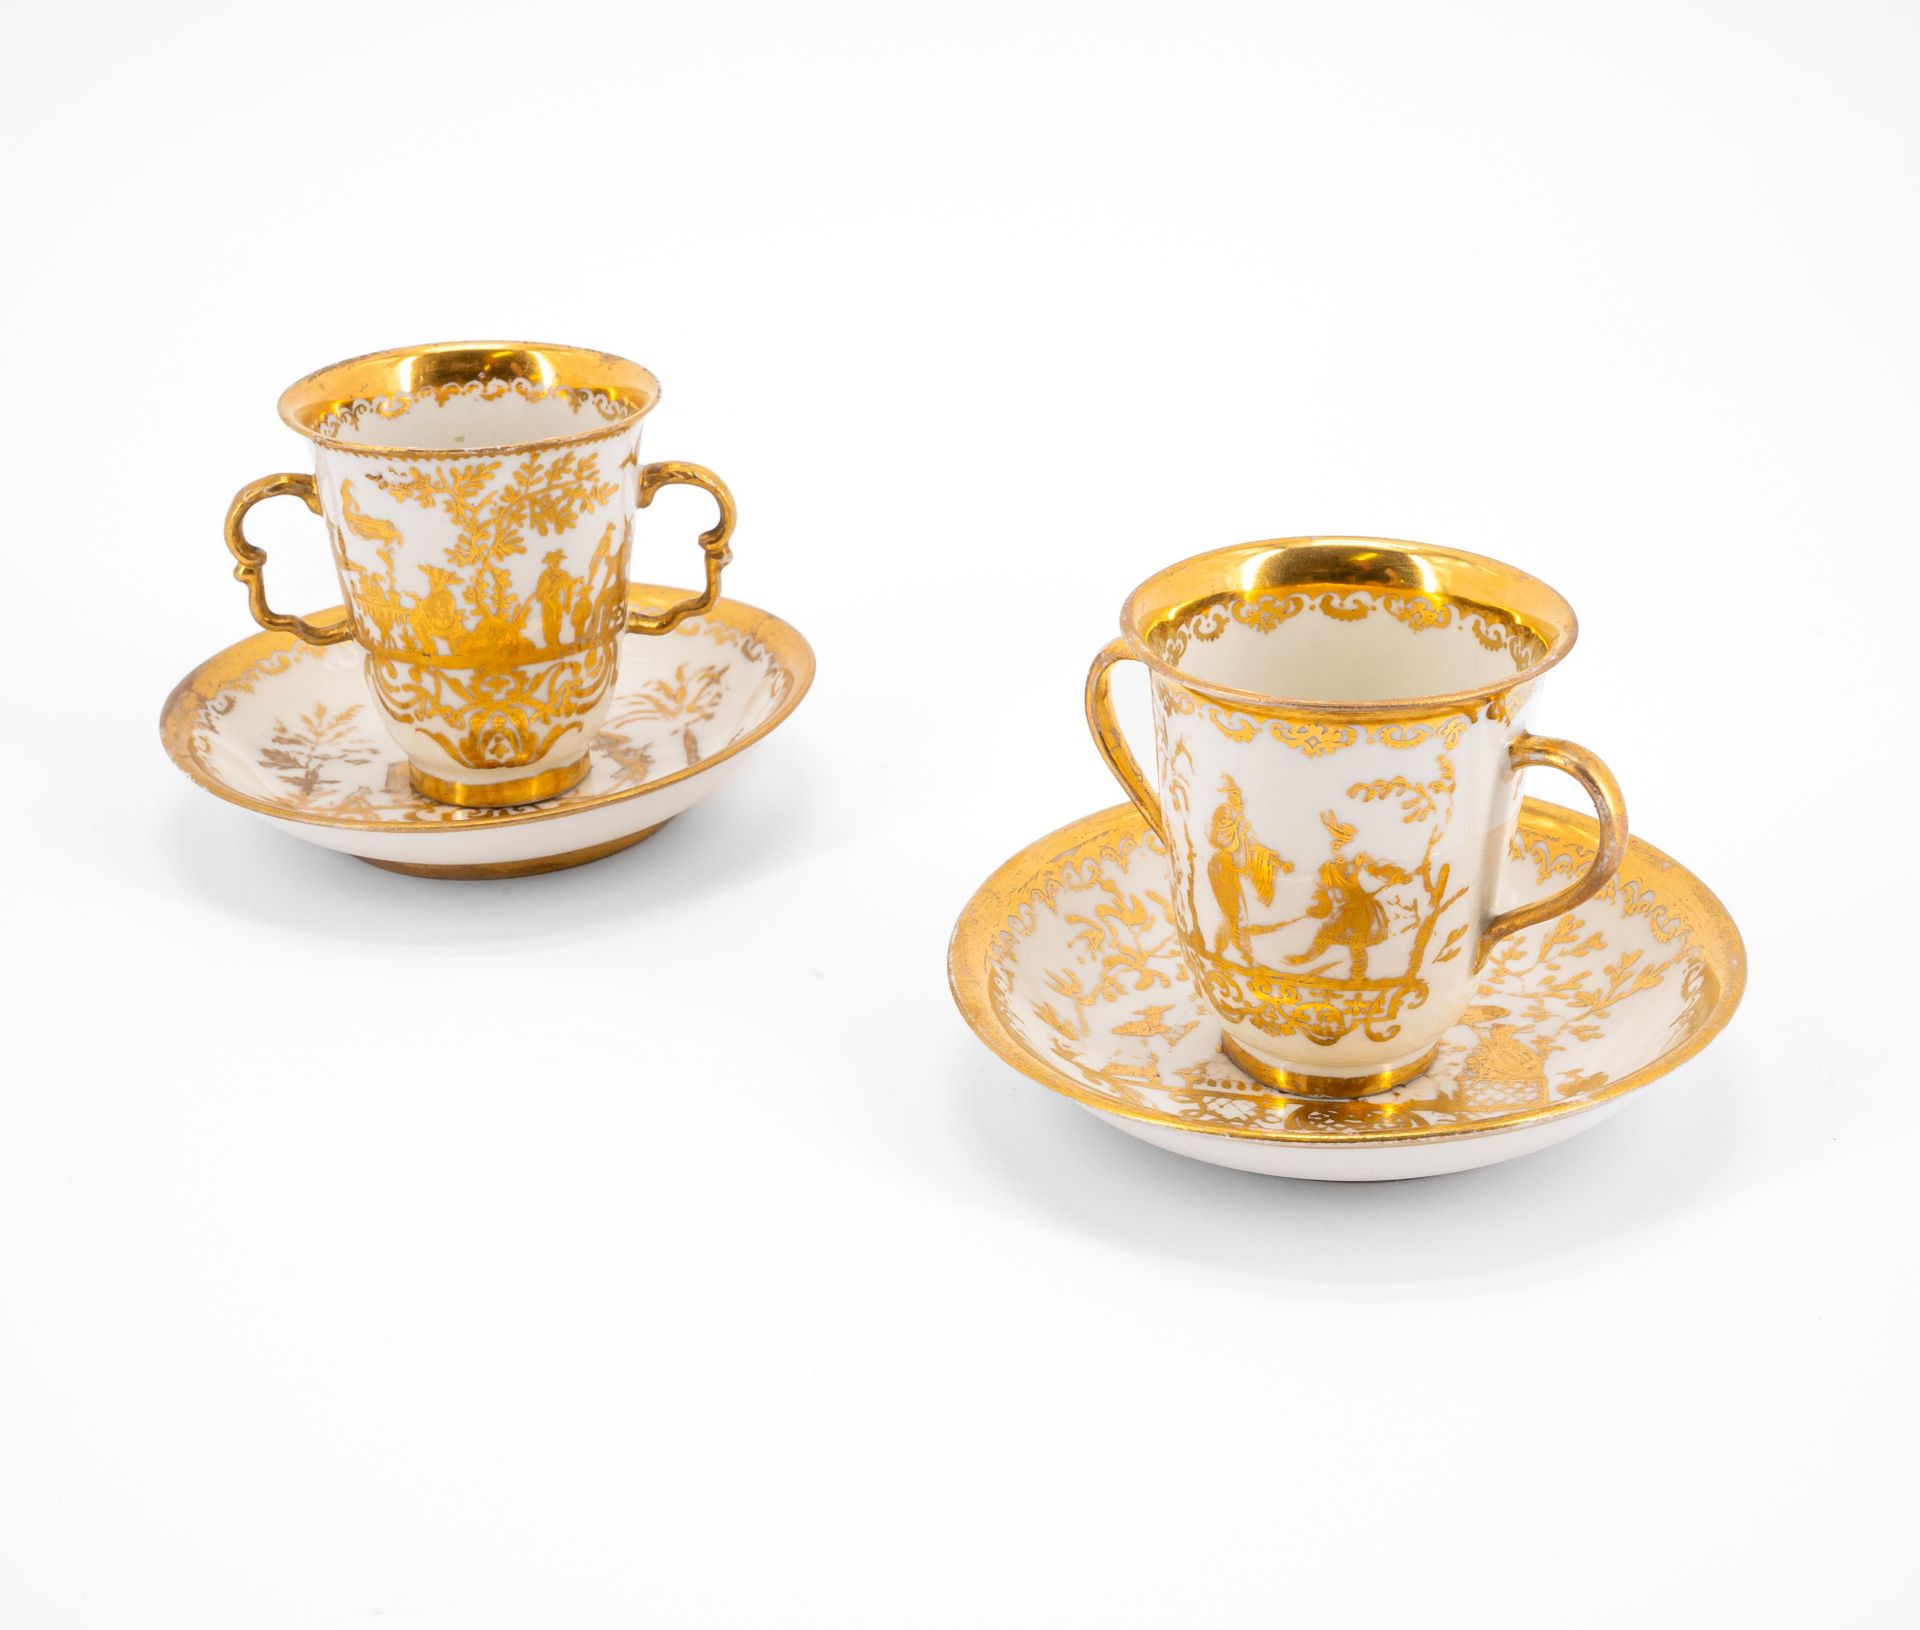 Meissen: TWO PORCELAIN BEAKERS WITH DOUBLE HANDLE AND SAUCERS WITH GOLDEN CHINOISERIES